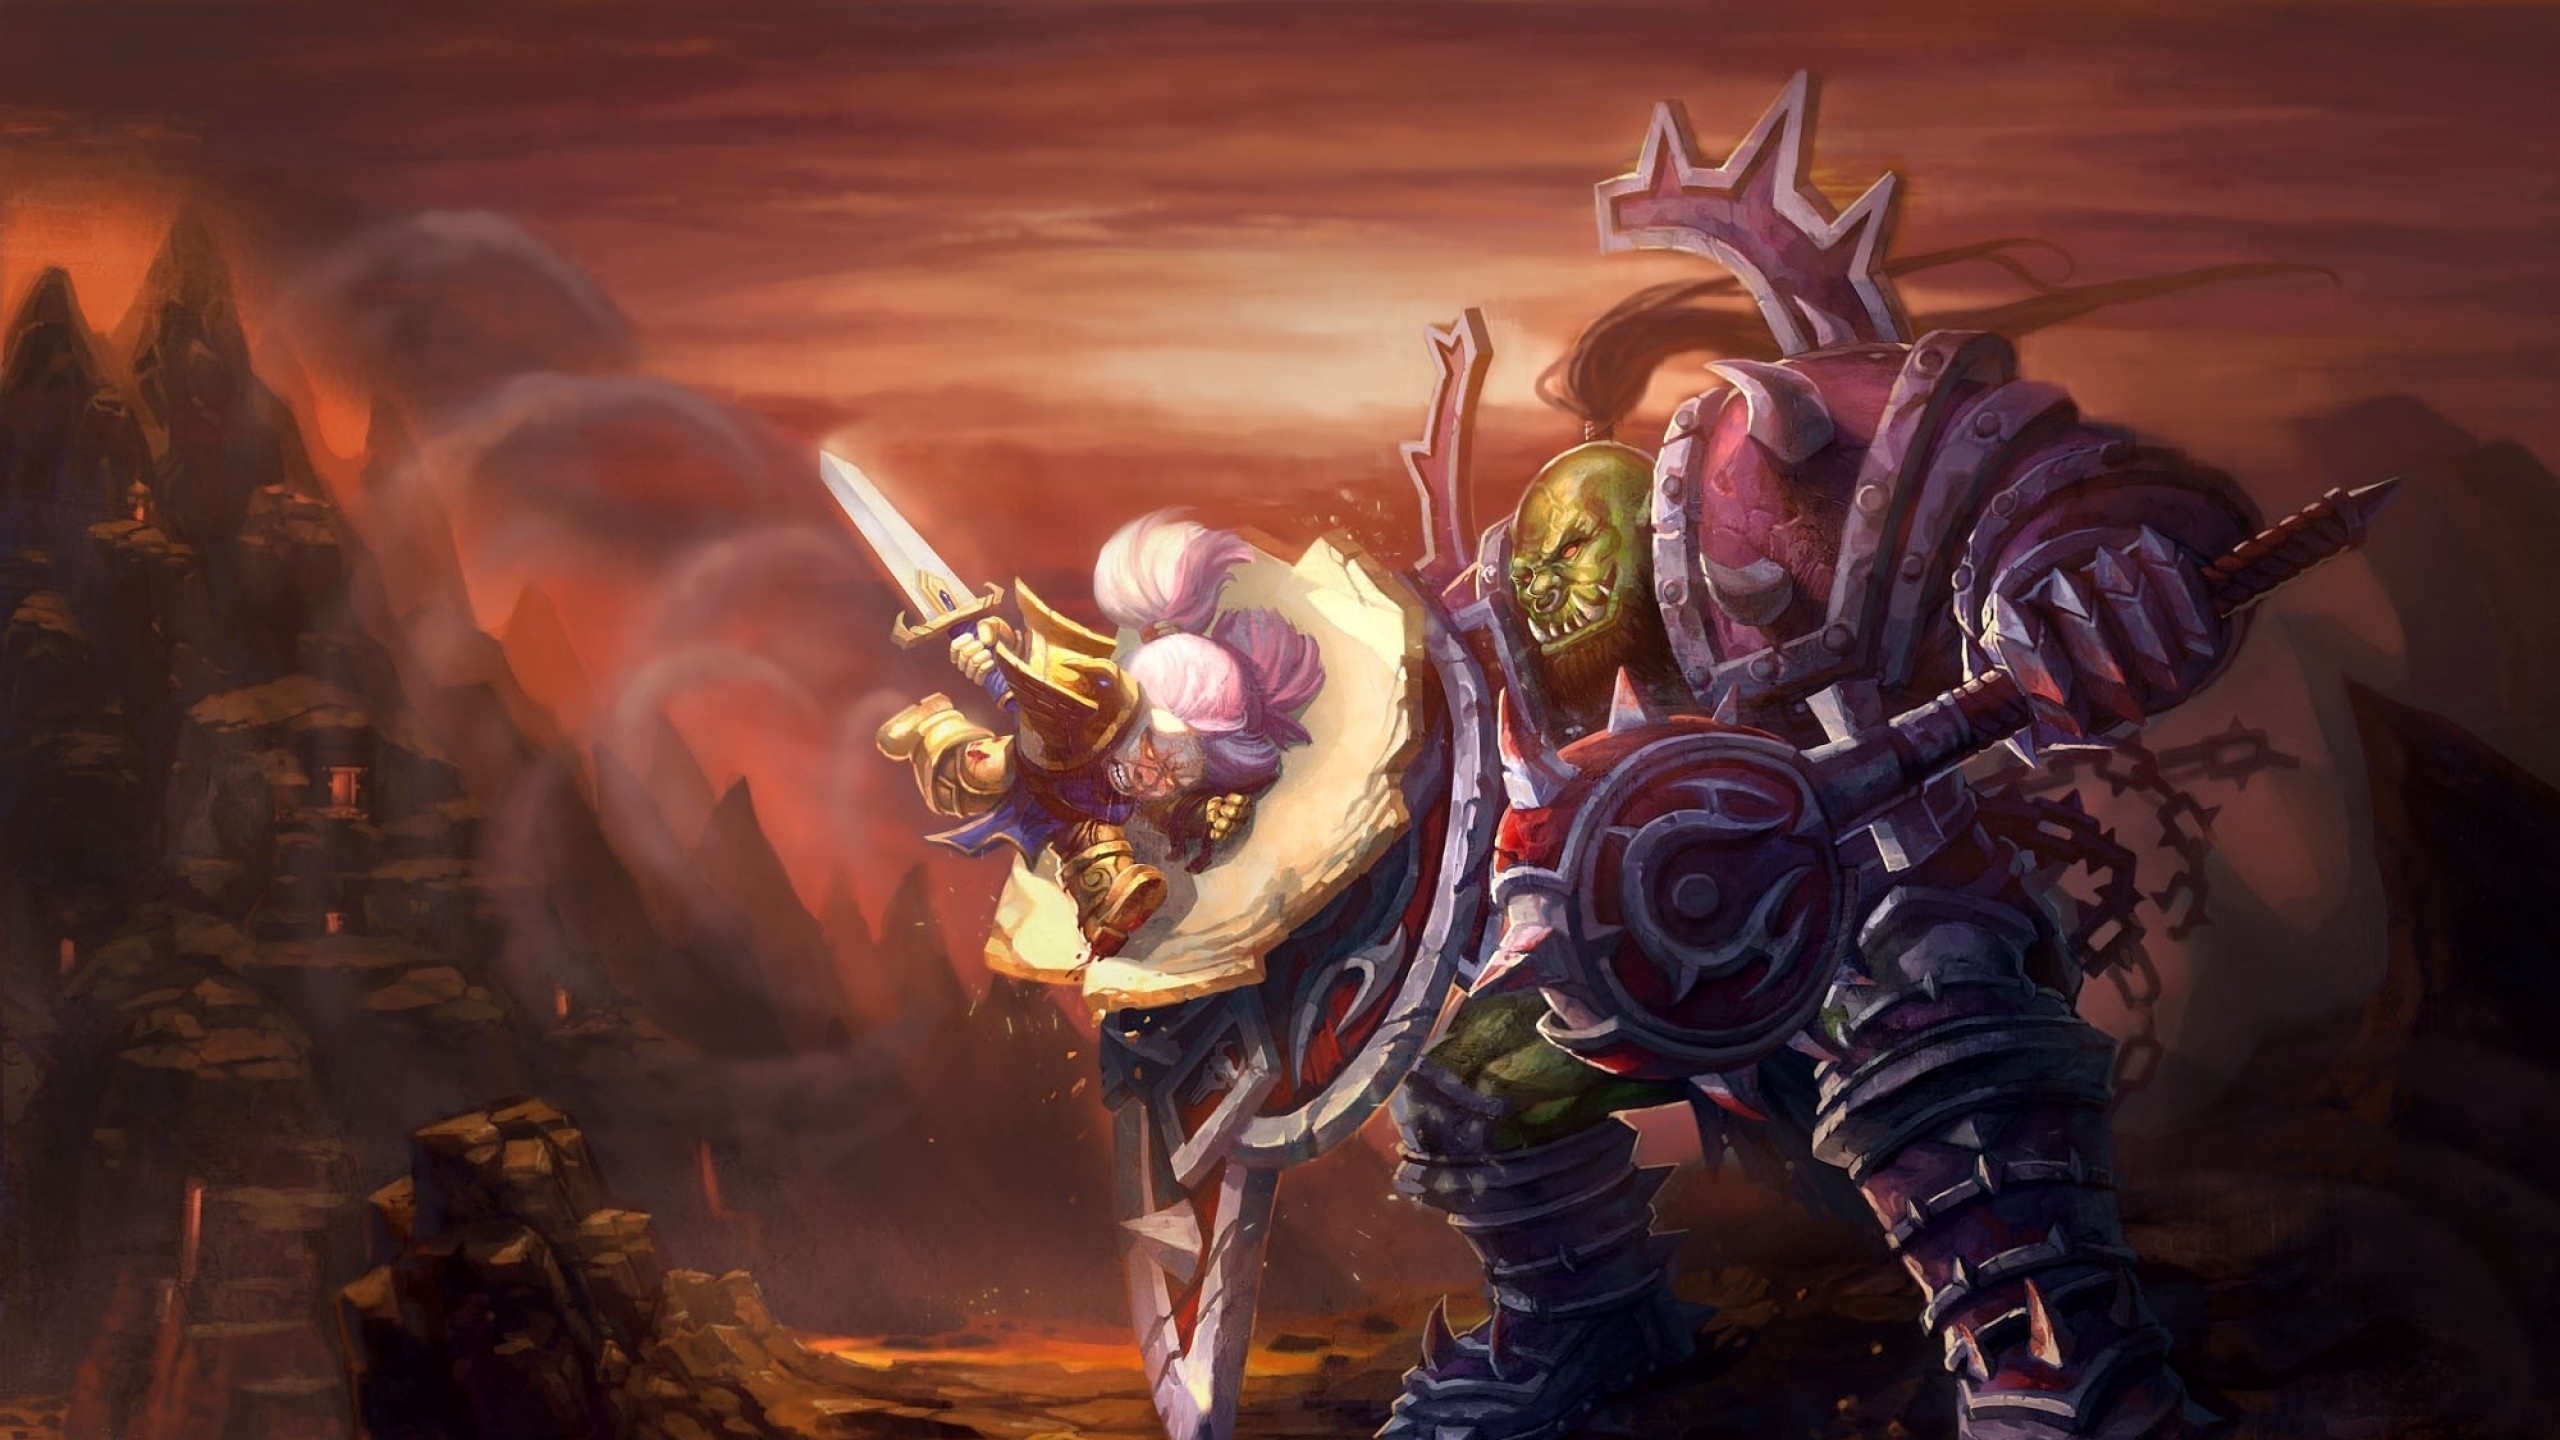 Wallpaper World Of Warcraft, Wow, Orc, Warrior, Dwarf, - World Of Warcraft Wallpaper Orc Warrior - HD Wallpaper 